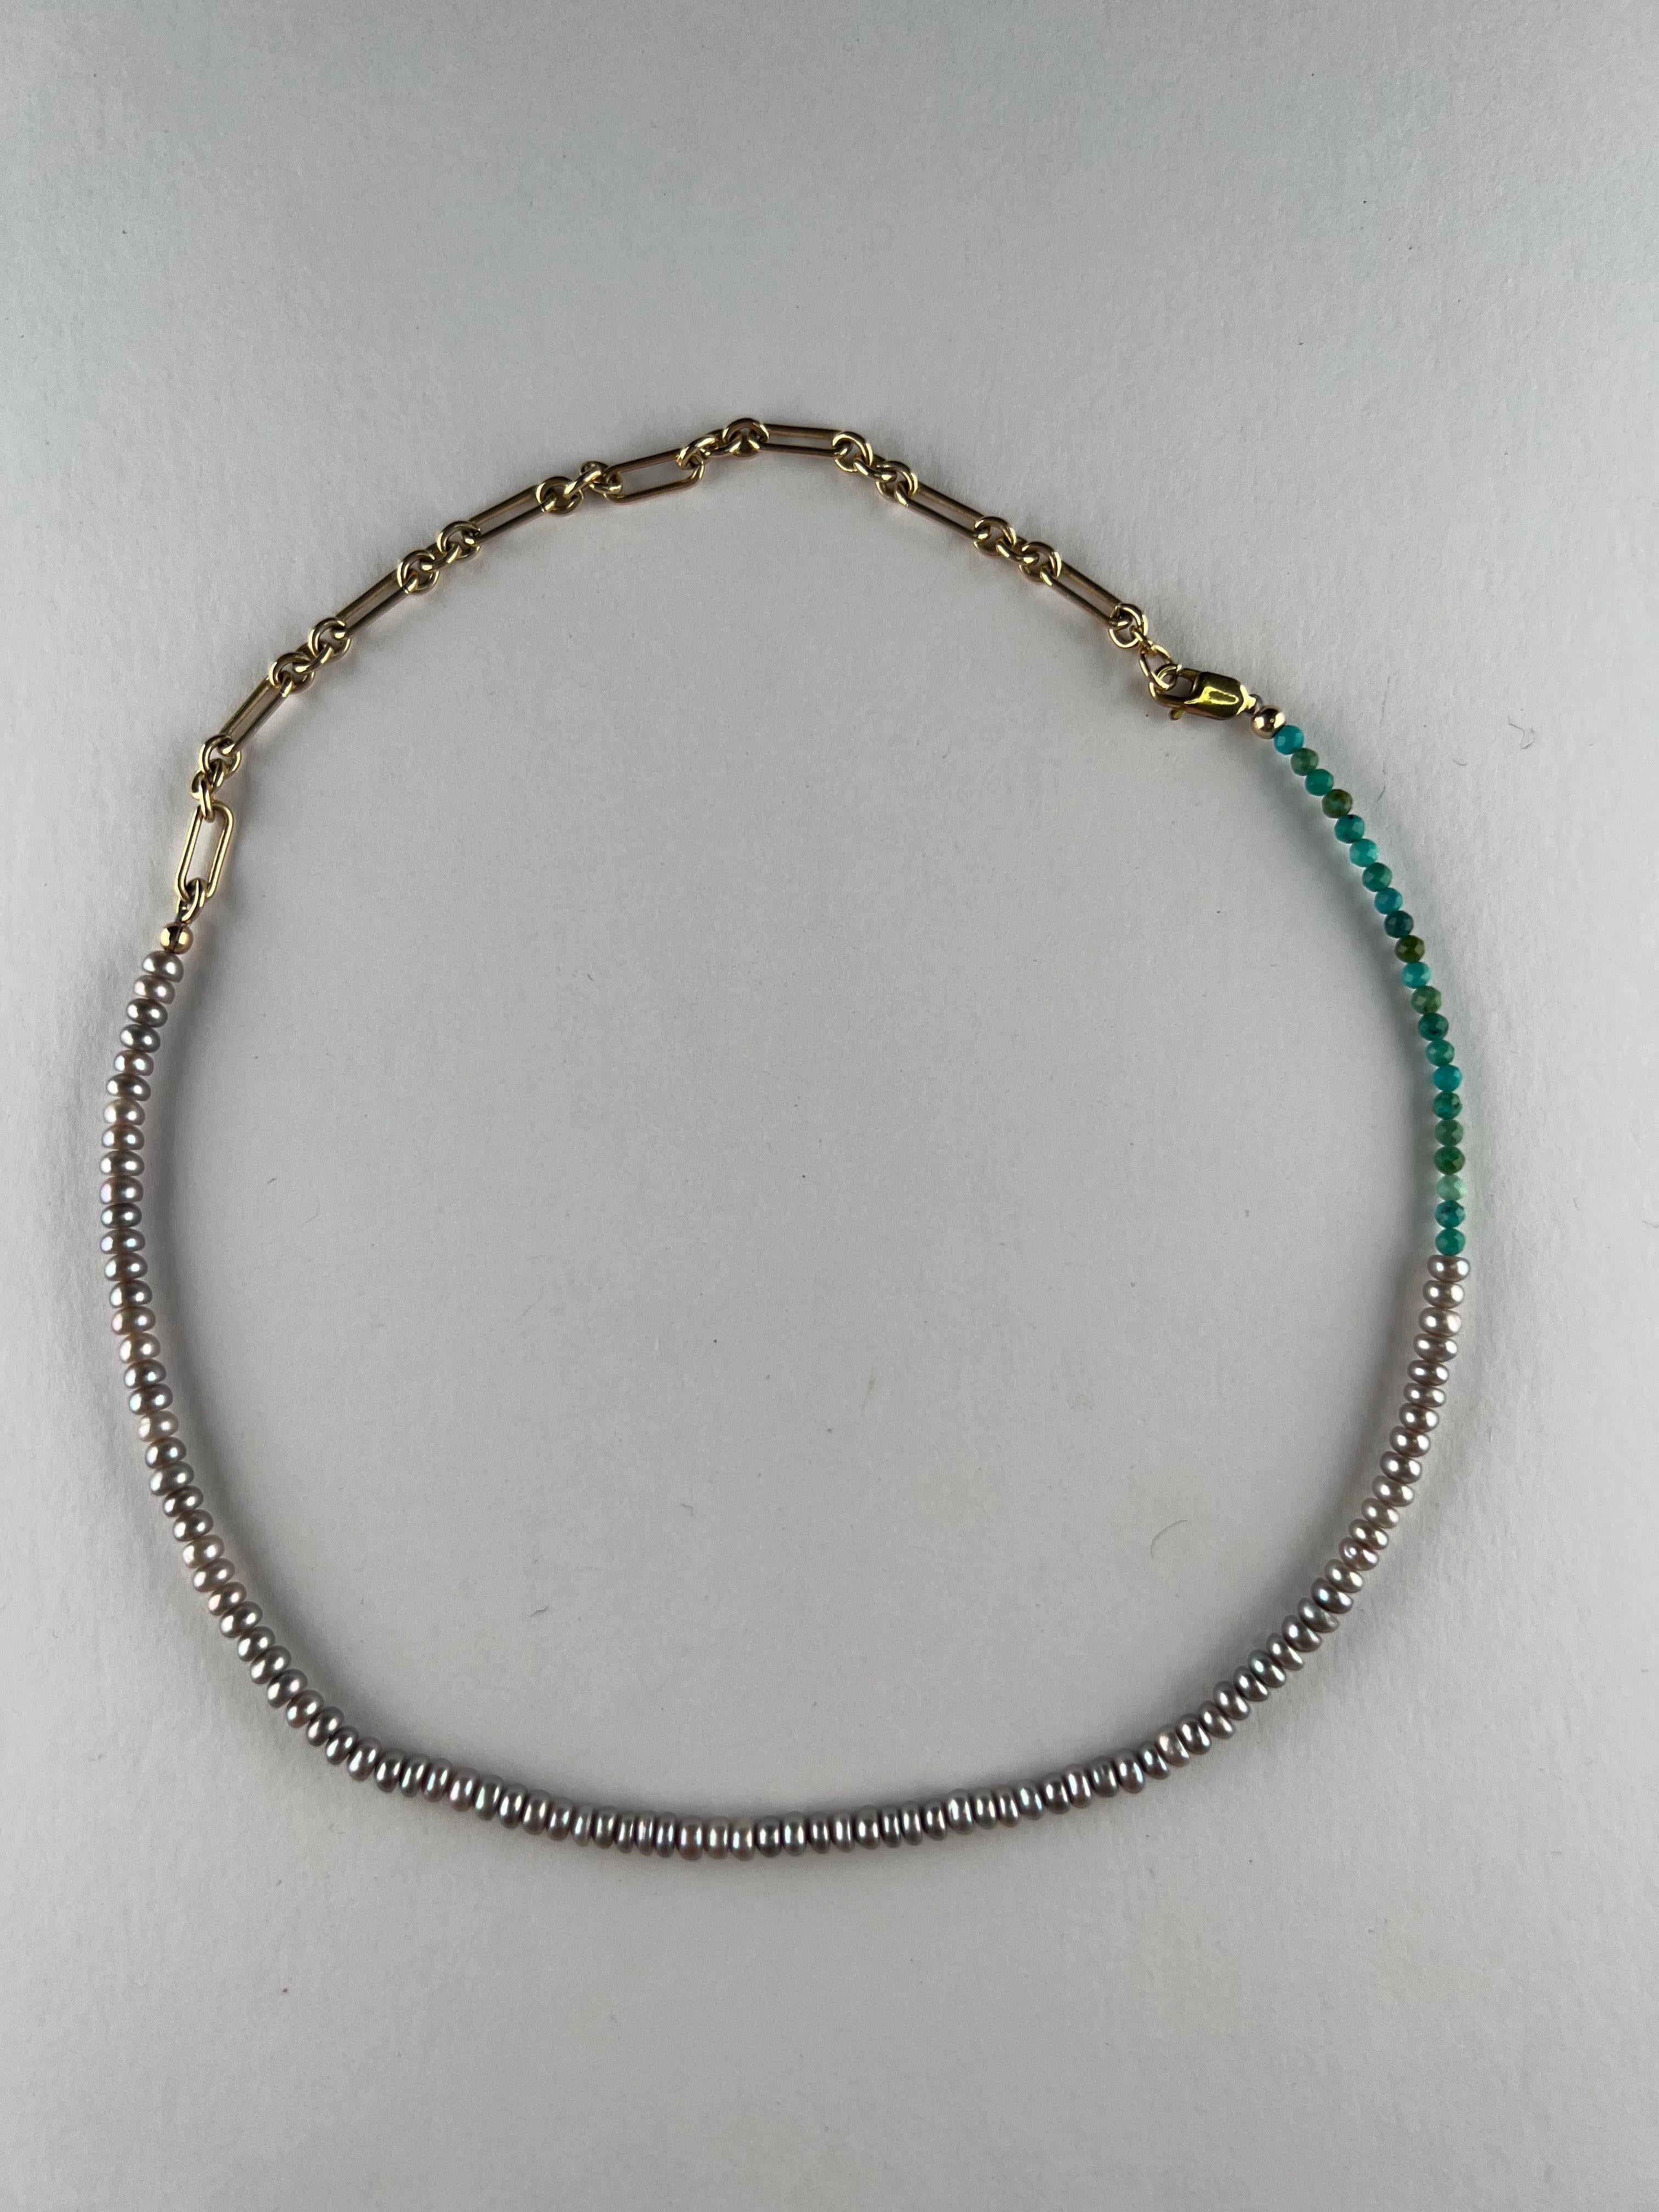 Silver Pearl Chain Necklace Choker Beaded Chrysoprase J Dauphin For Sale 1